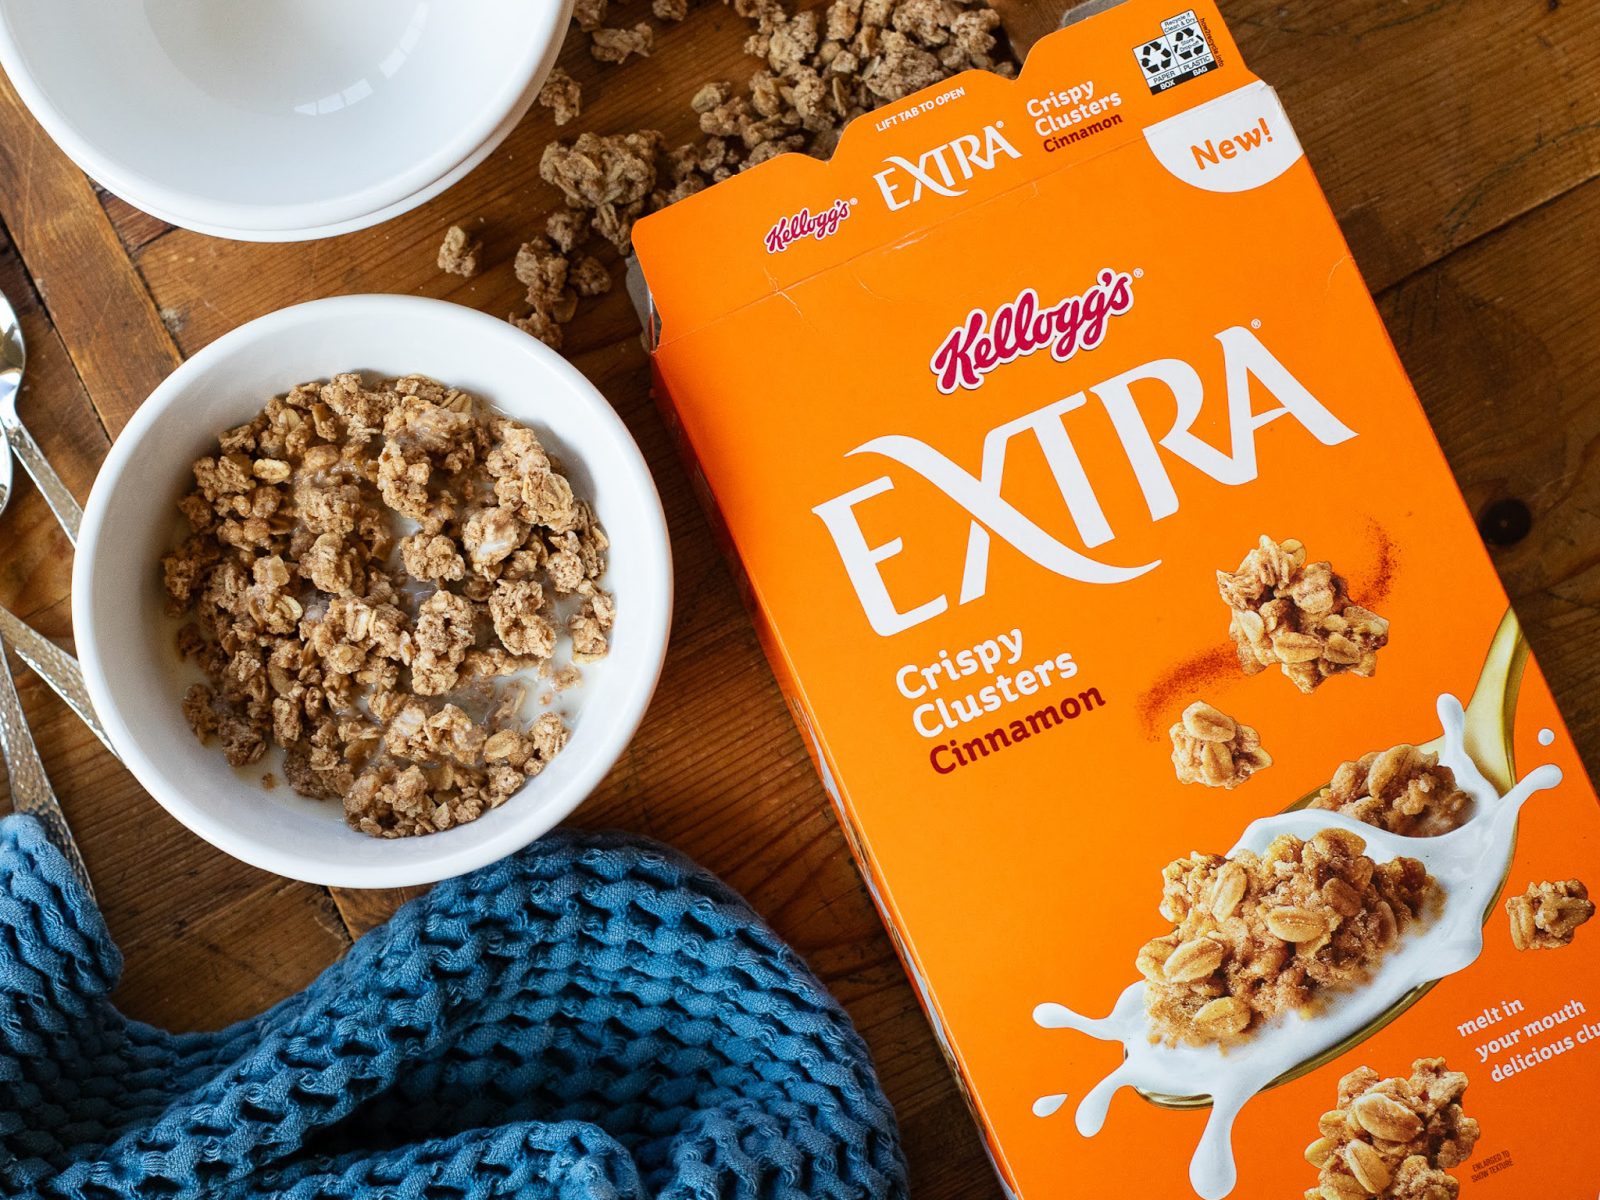 Save On Kelloggs Extra Granola Cereal at Kroger as Low as $3.99 Per Box